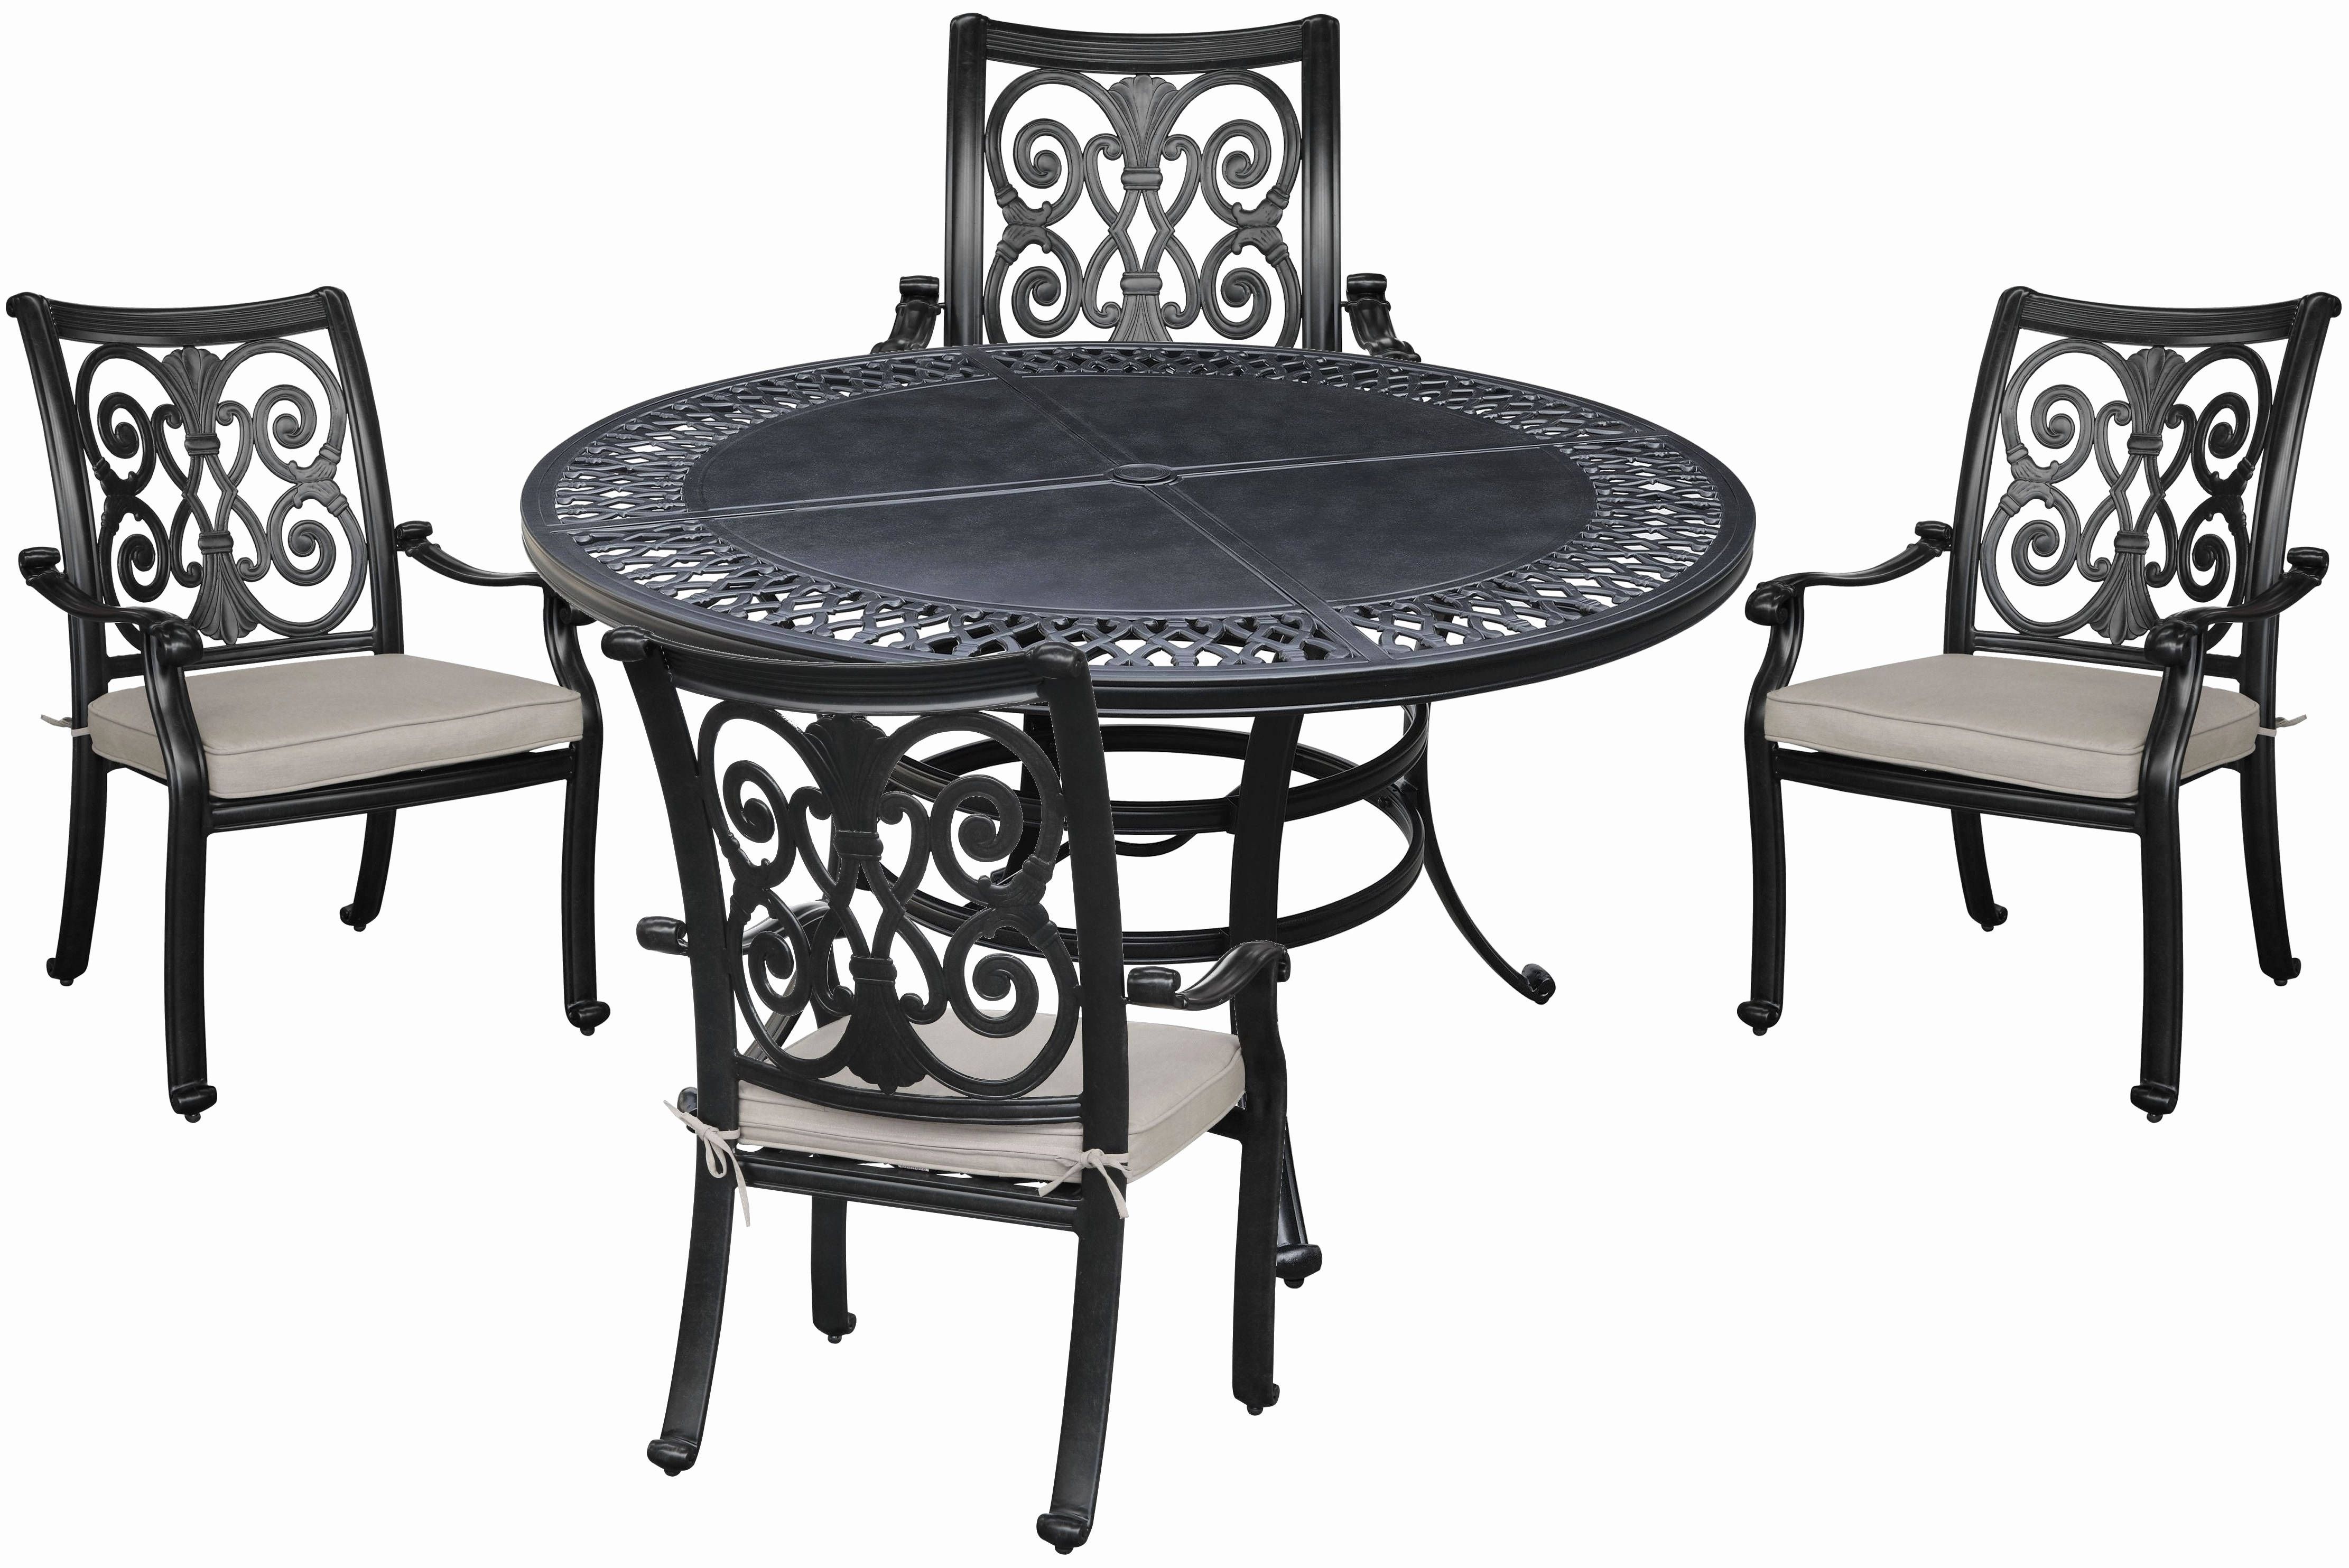 35 Rare Magnolia Home Coffee Table – Coffee Table And Countertops Intended For Best And Newest Magnolia Home Breakfast Round Black Dining Tables (View 20 of 20)